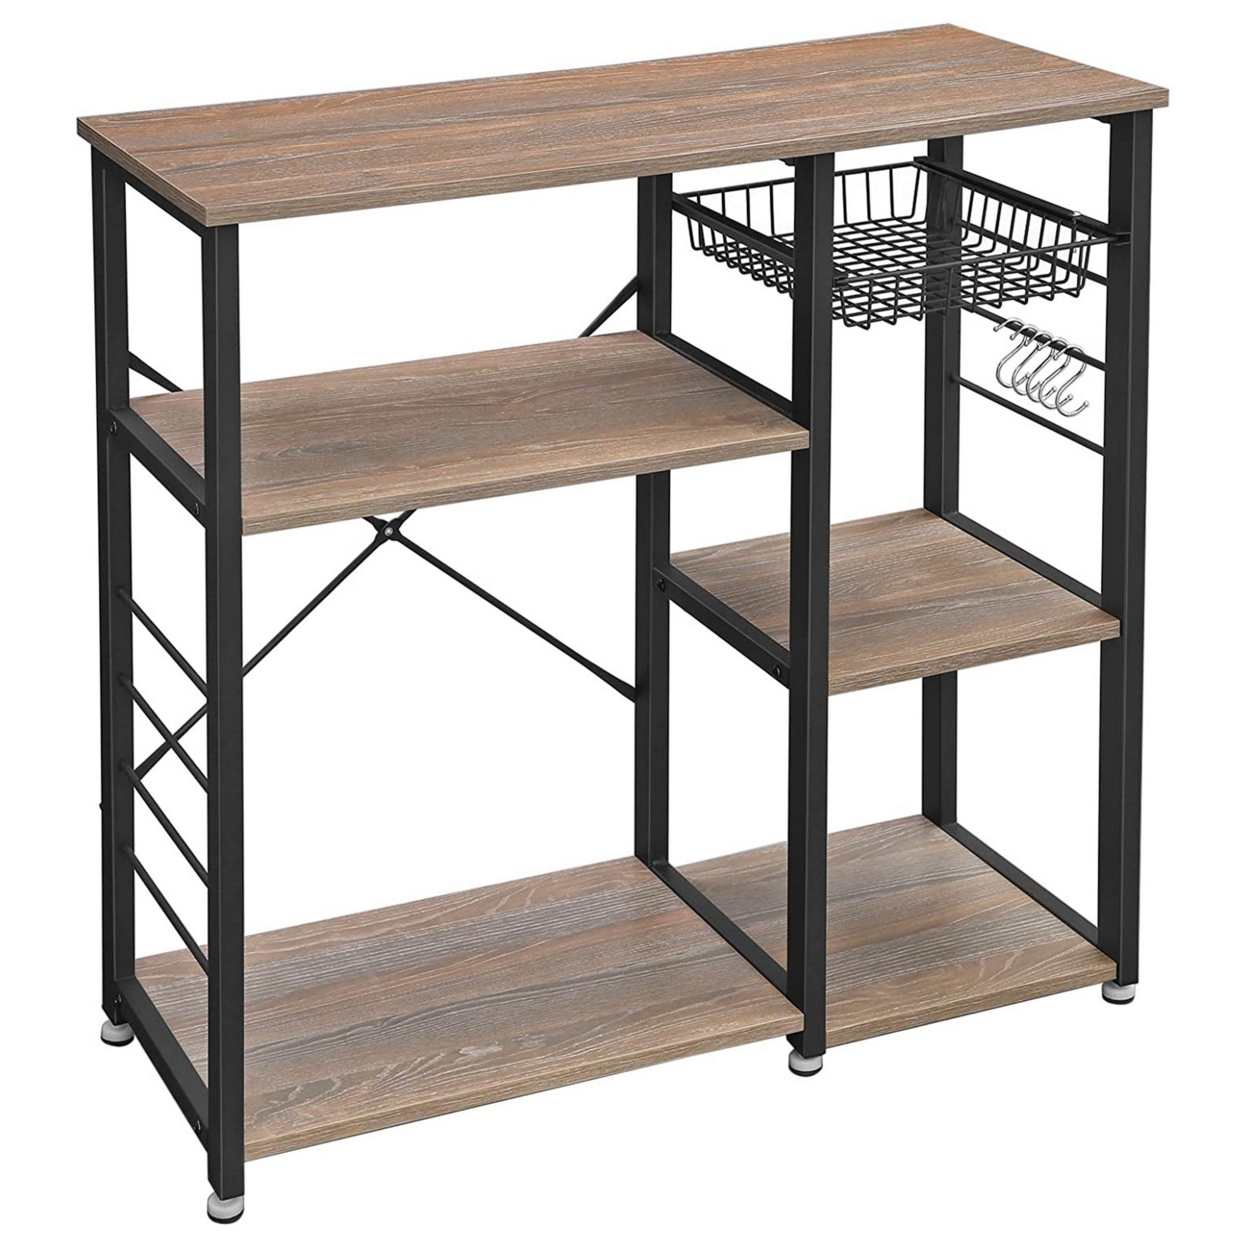 Wooden Bakers Rack with 4 Shelves and Wire Basket, Brown and Black- Saltoro Sherpi